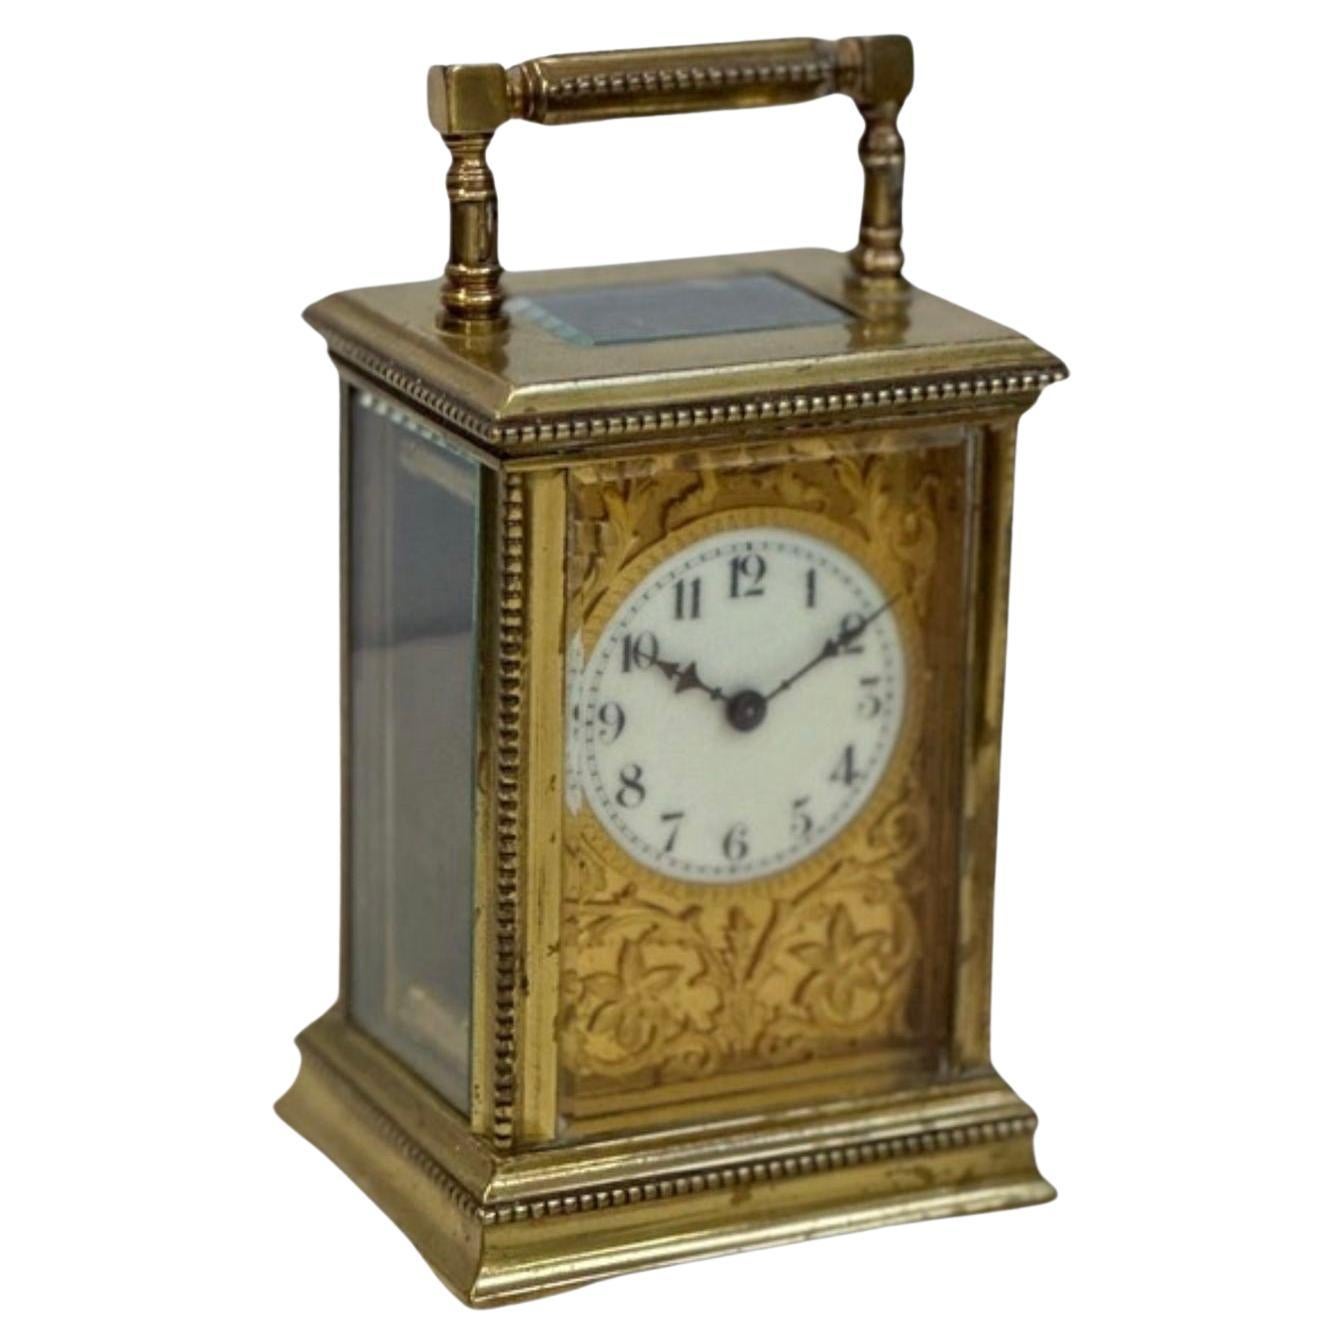 Nu Elck Syn Sin Wall Clock from the Early 20th Century For Sale at 1stDibs  | nu elck syn sin clock value, nu elck syn sin wall clock age, nu elck syn